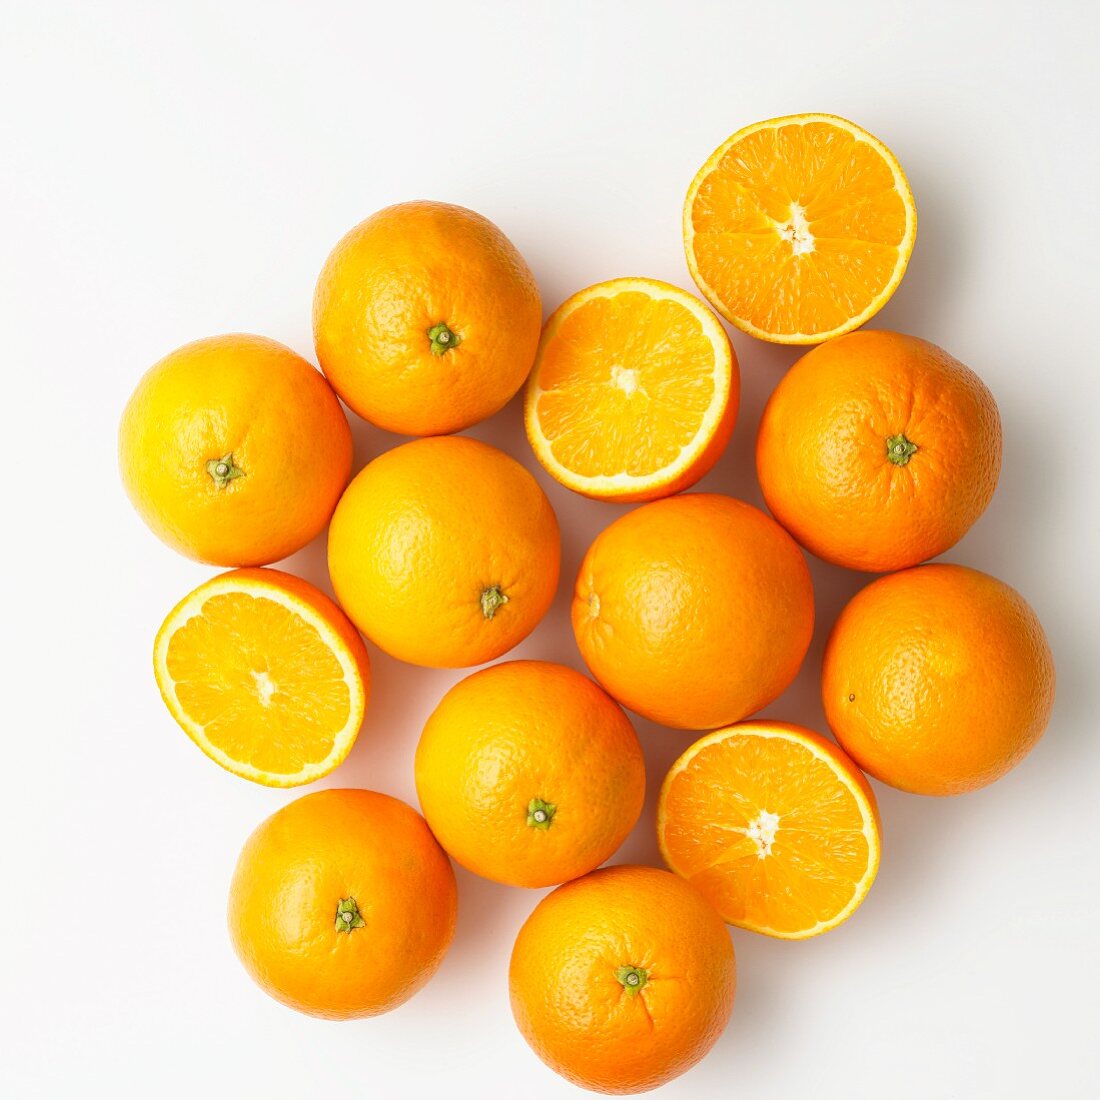 Oranges, whole and halved on a white surface (seen from above)